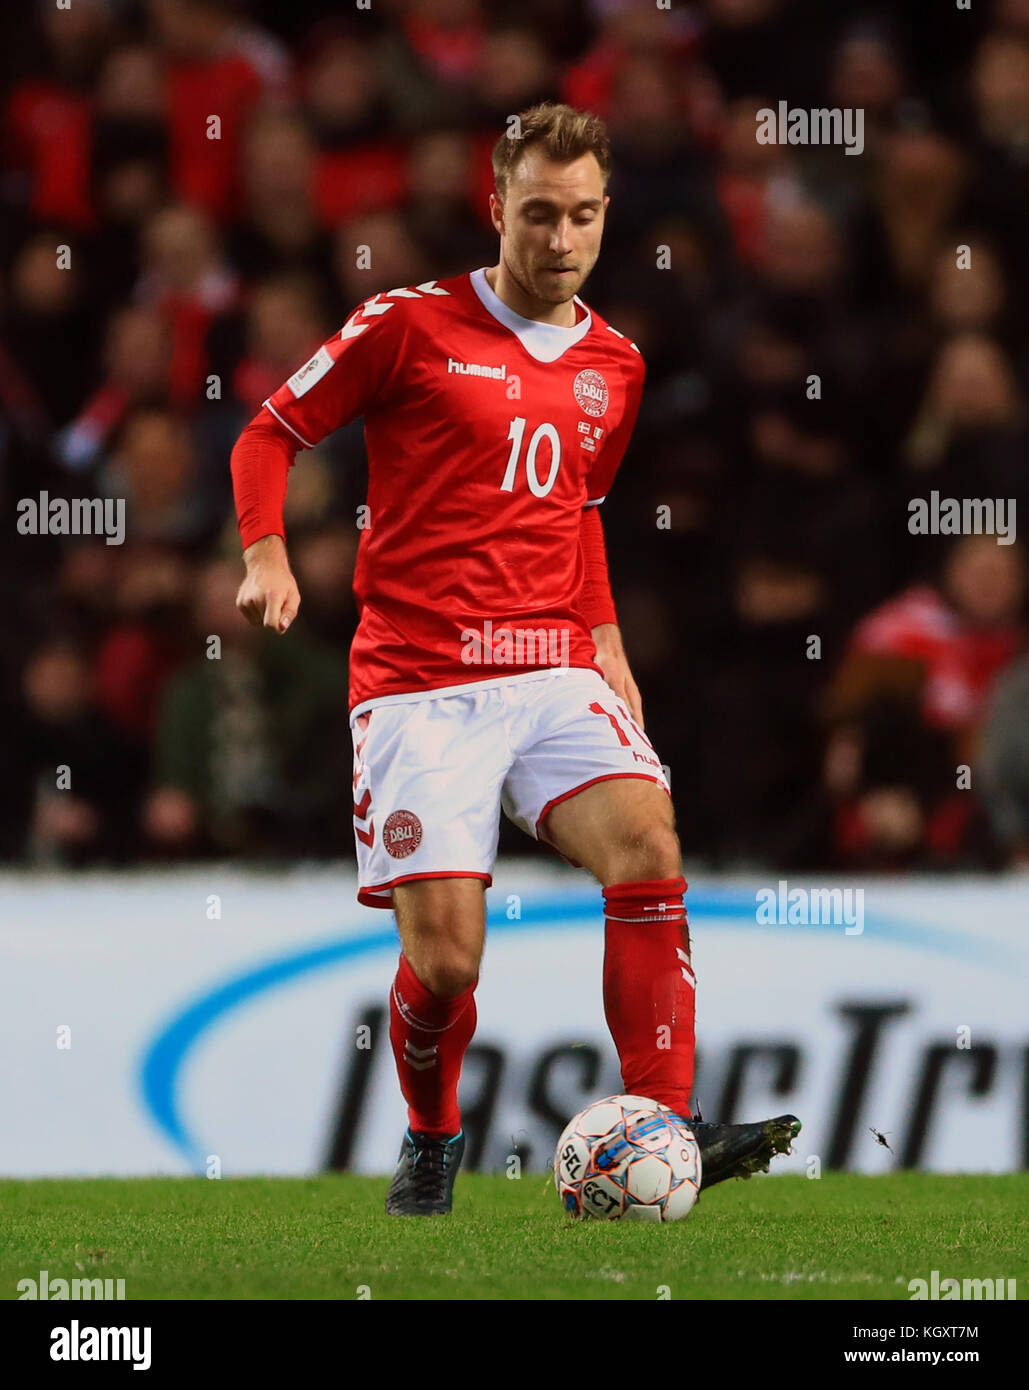 Denmark's Christian Eriksen during the FIFA World Cup qualifying play-off first leg match at the Parken Stadium, Copenhagen. PRESS ASSOCIATION Photo. Picture date: Saturday November 11, 2017. See PA story SOCCER Republic. Photo credit should read: Tim Goode/PA Wire. . Stock Photo